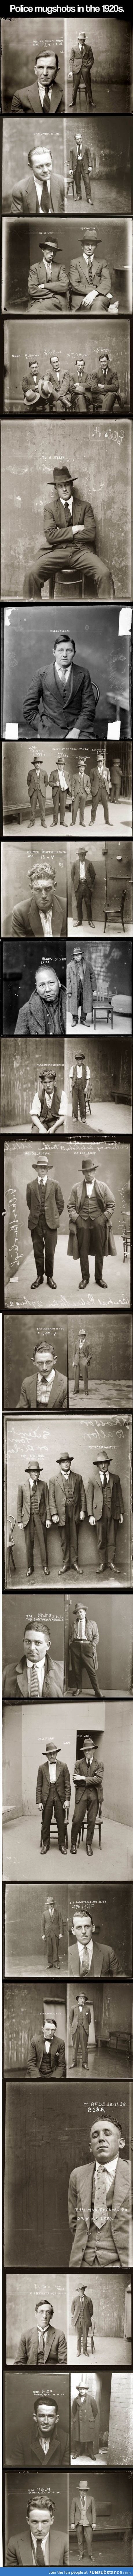 Police mugshots in the 1920's